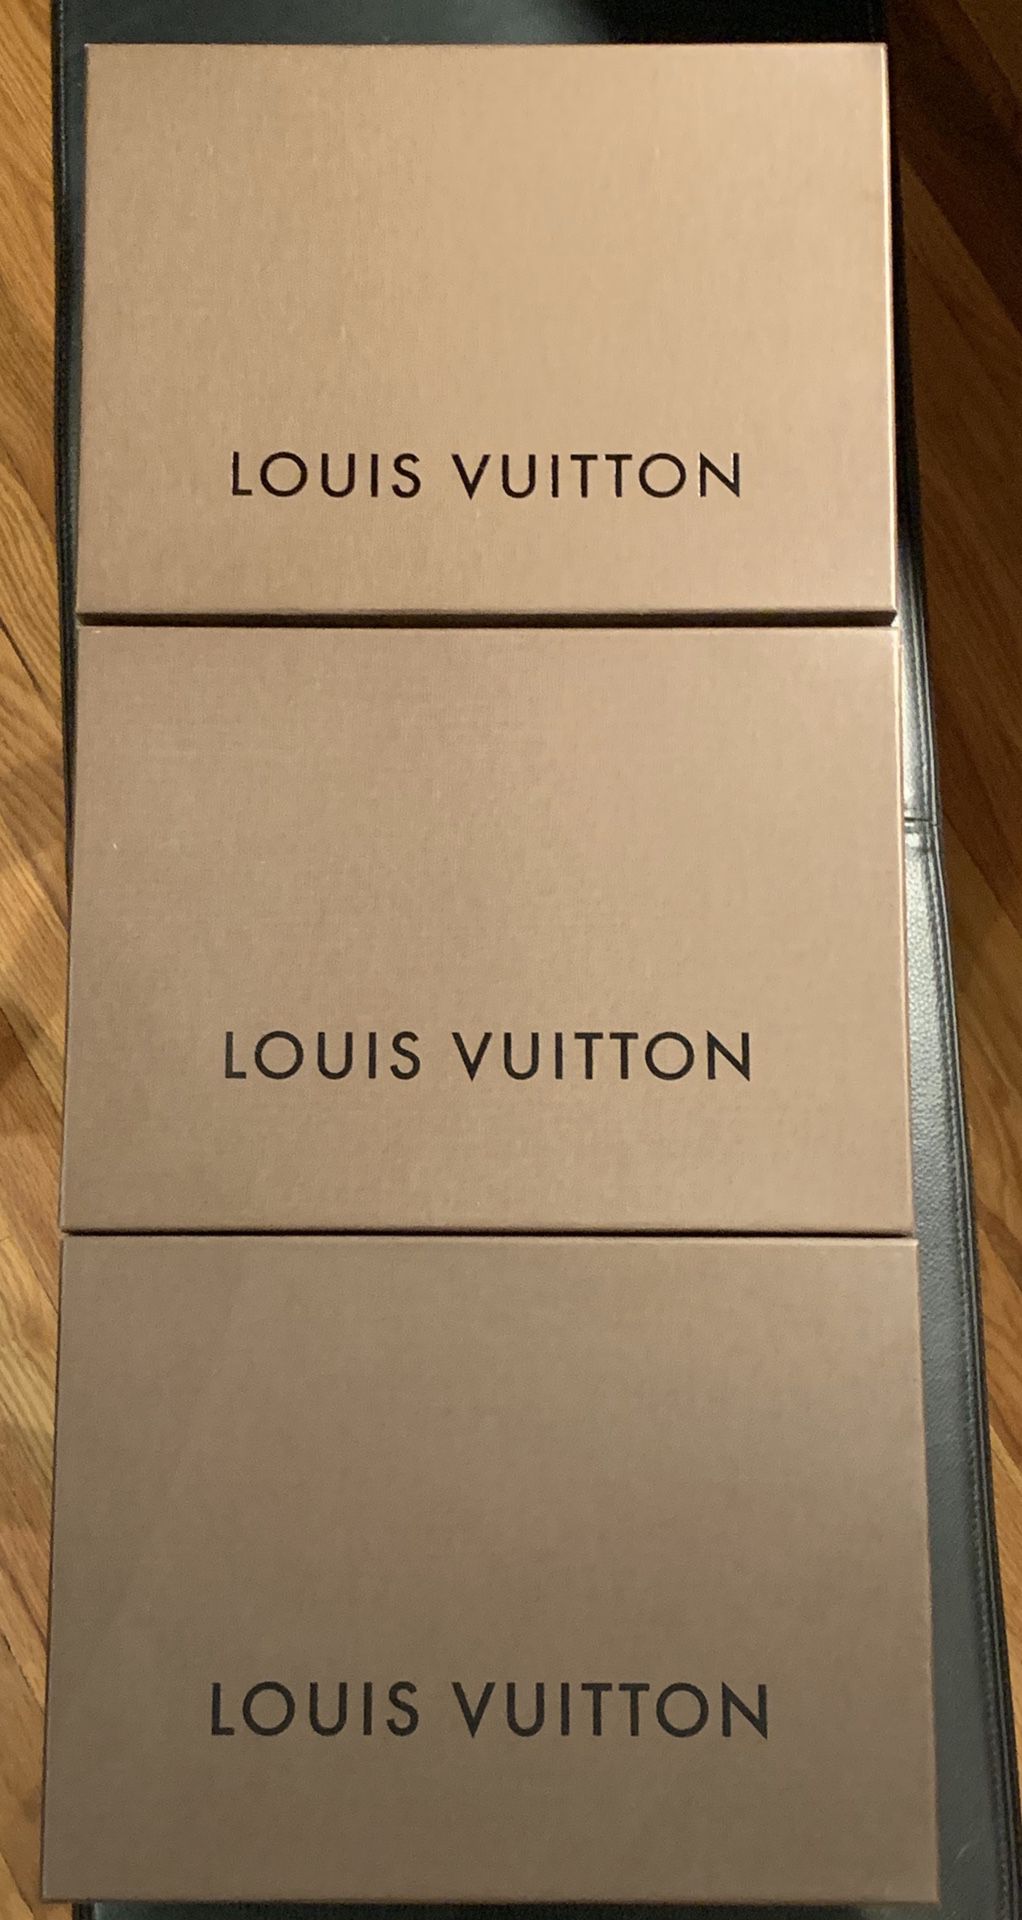 Louis Vuitton gift boxes and shopping bags, $10 each or $25 for 3.